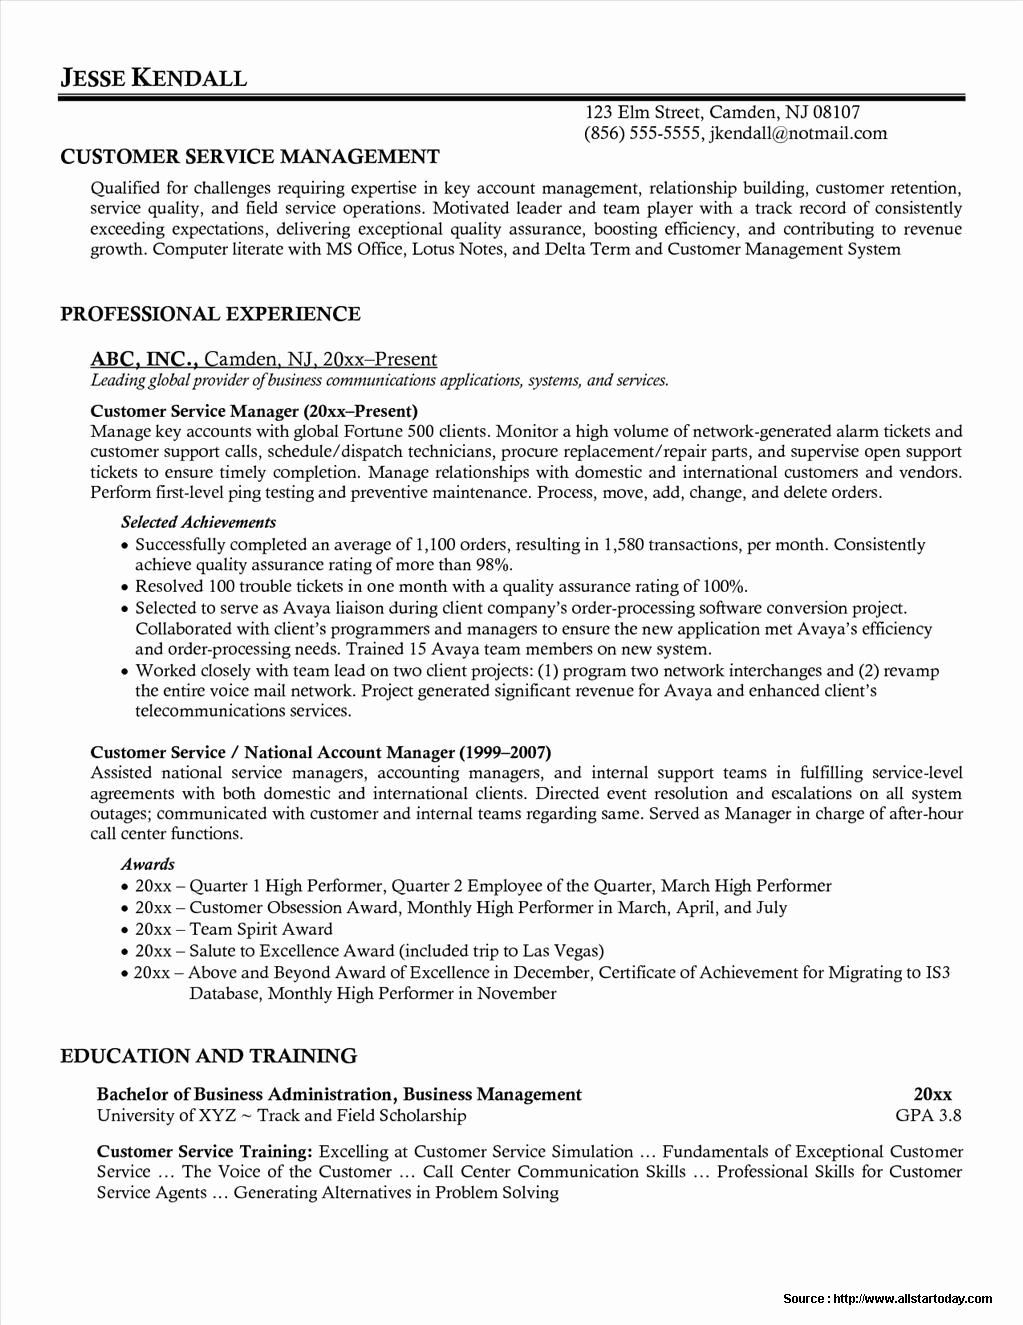 Samples Resumes for Customer Service Manager Resume